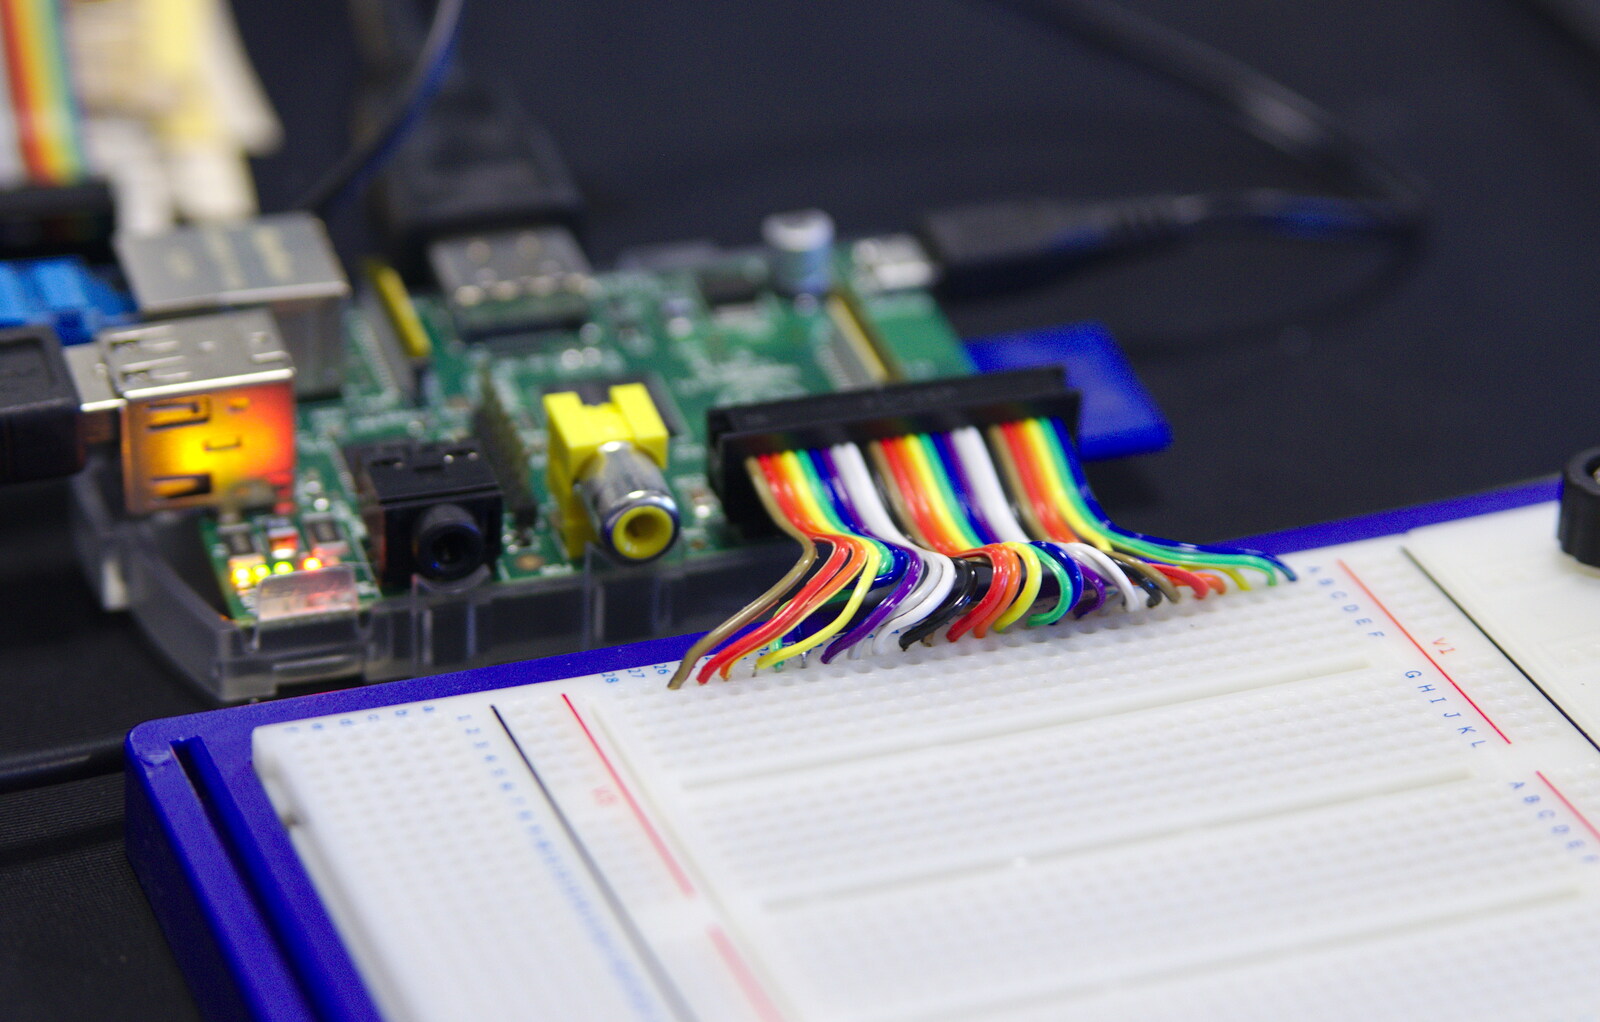 The Raspberry Pi is strapped in to a breadboard from SwiftKey Innovation, The Hub, Westminster, London - 21st February 2014